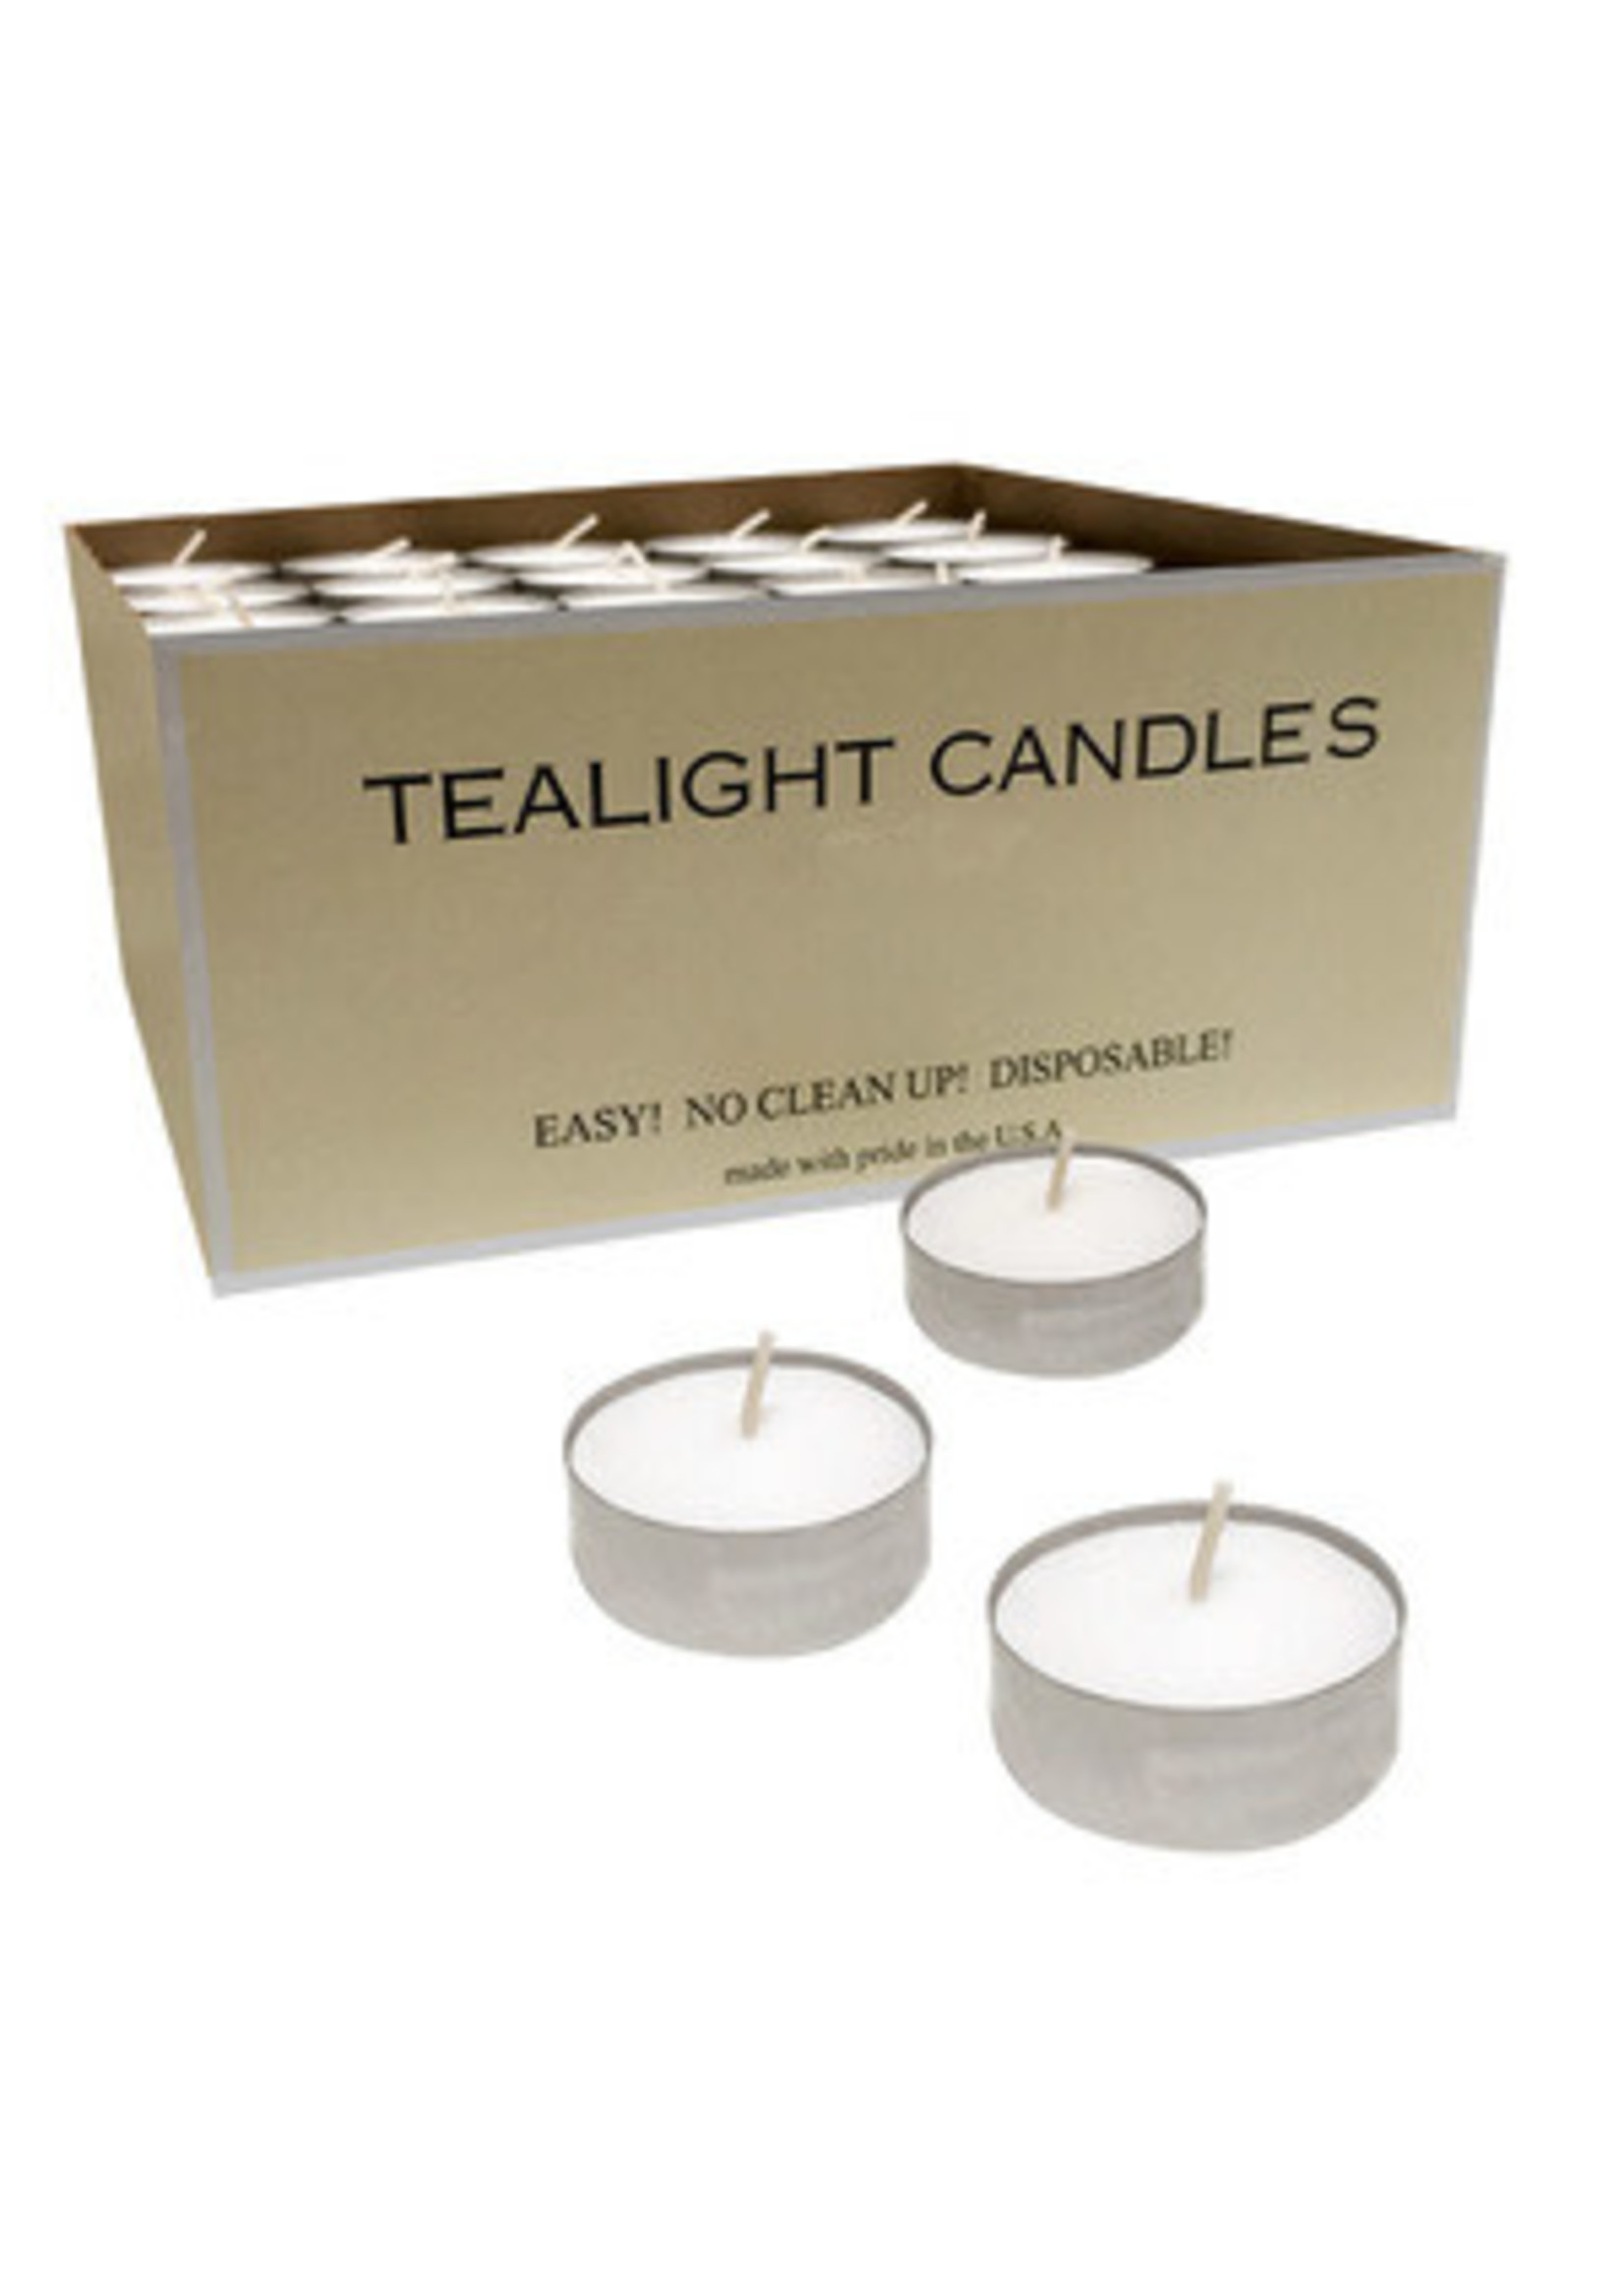 Tealight Candles in Metal Cups - full box (125)